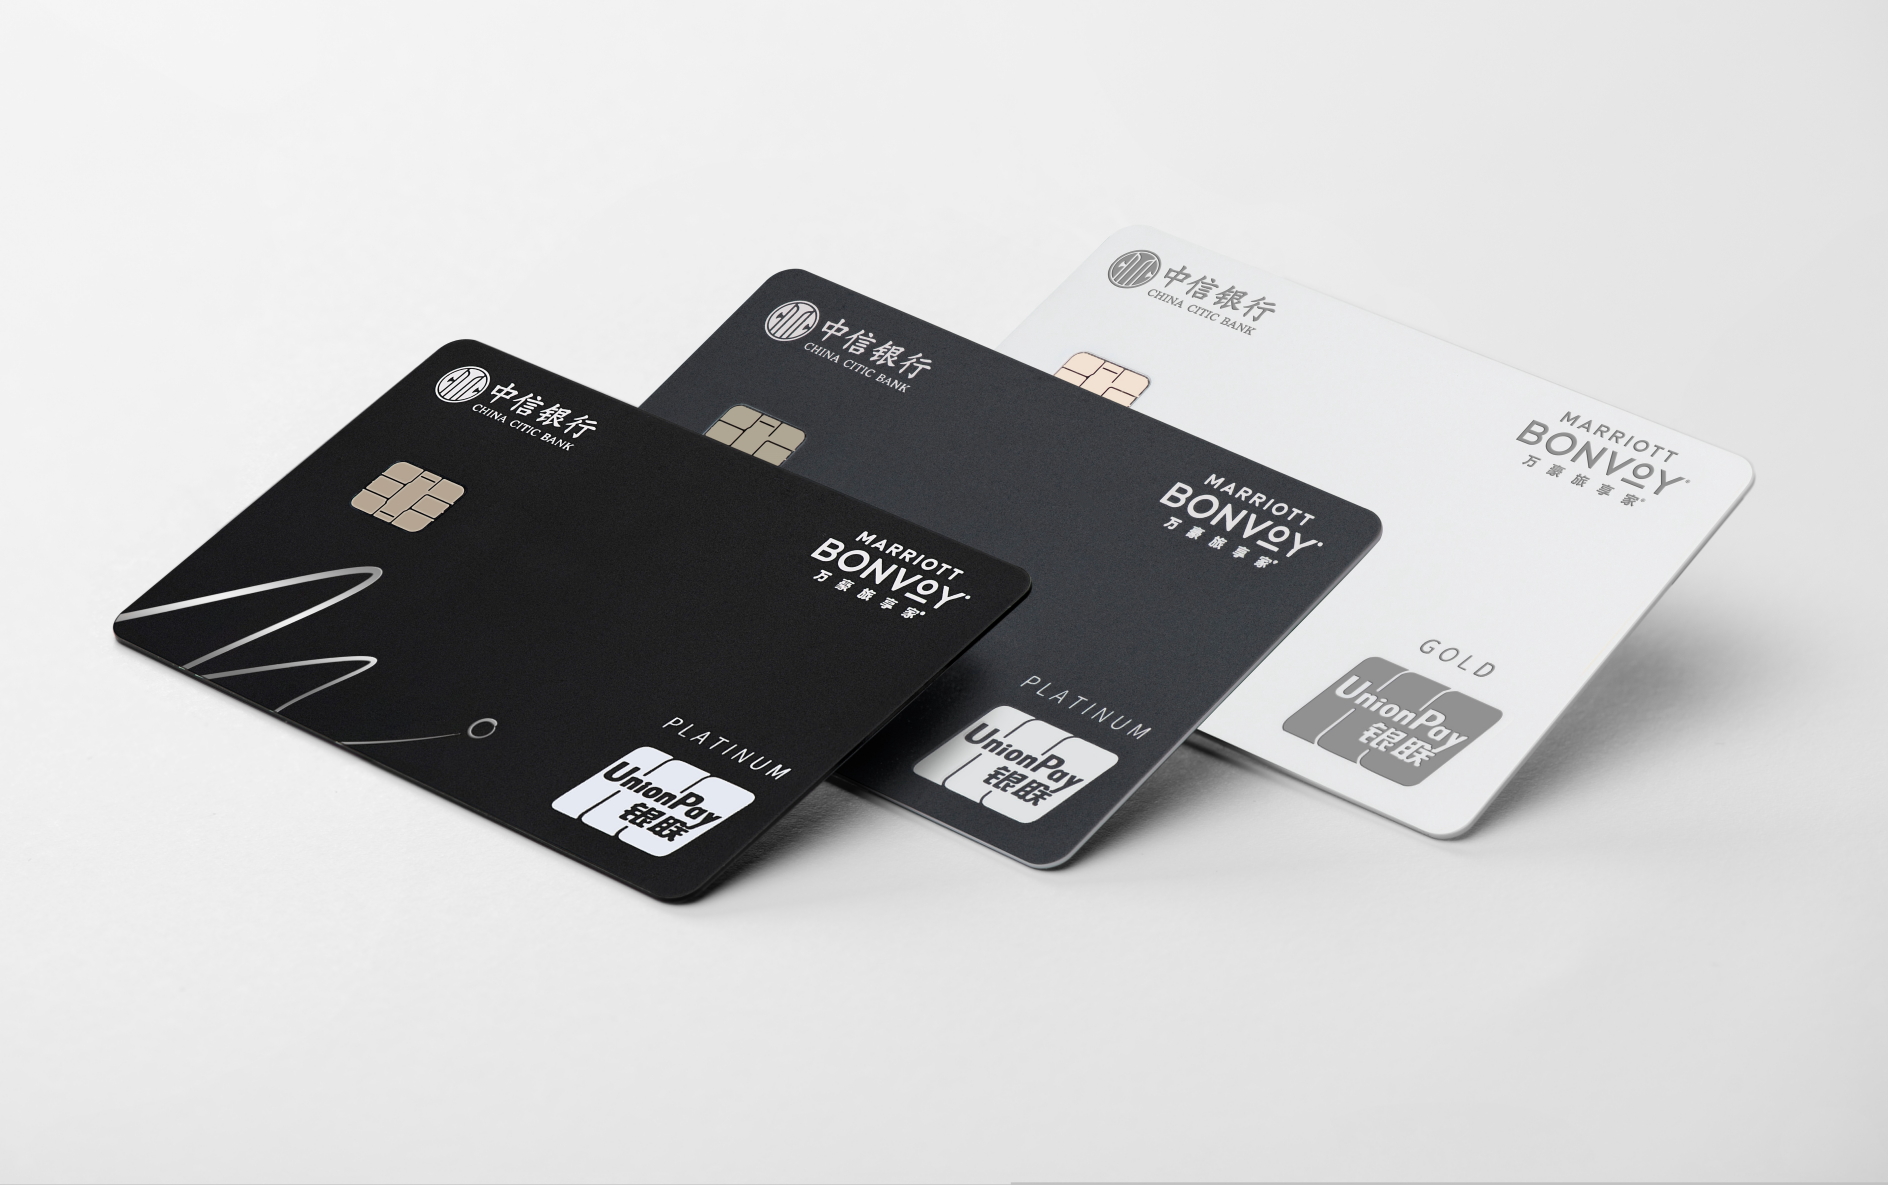 Marriott Bonvoy has launched three co-branded credit cards with China CITIC Bank Click to enlarge.